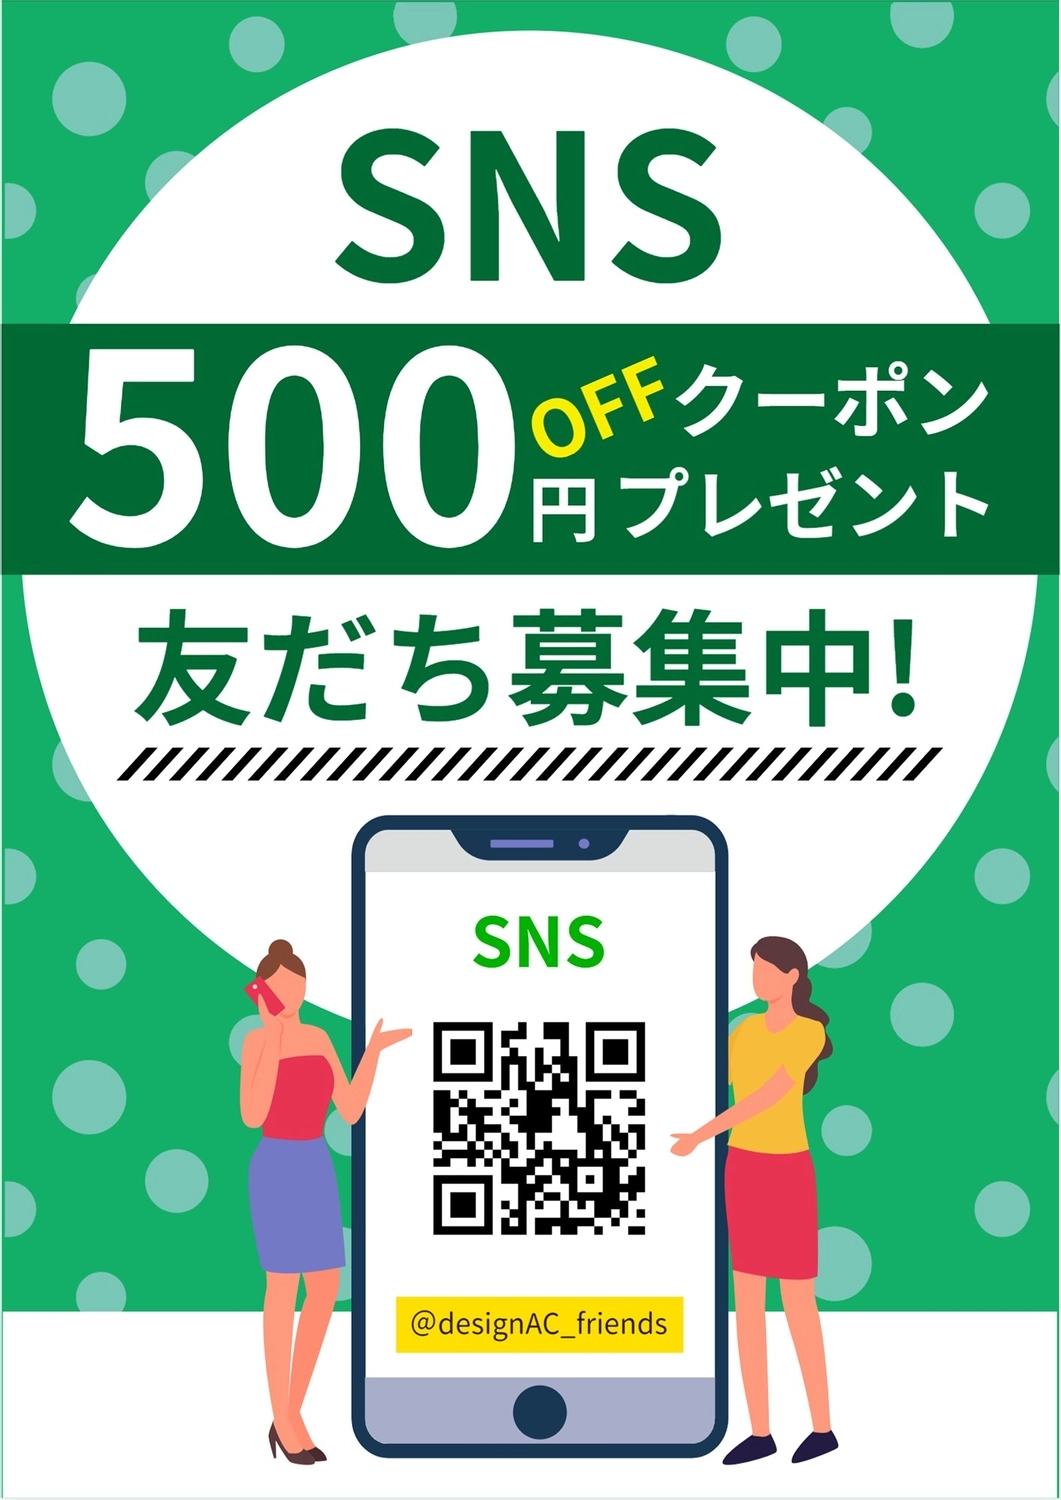 SNSクーポン（スマートフォンと女性のイラスト）, fashionable, shop, shop, Poster template